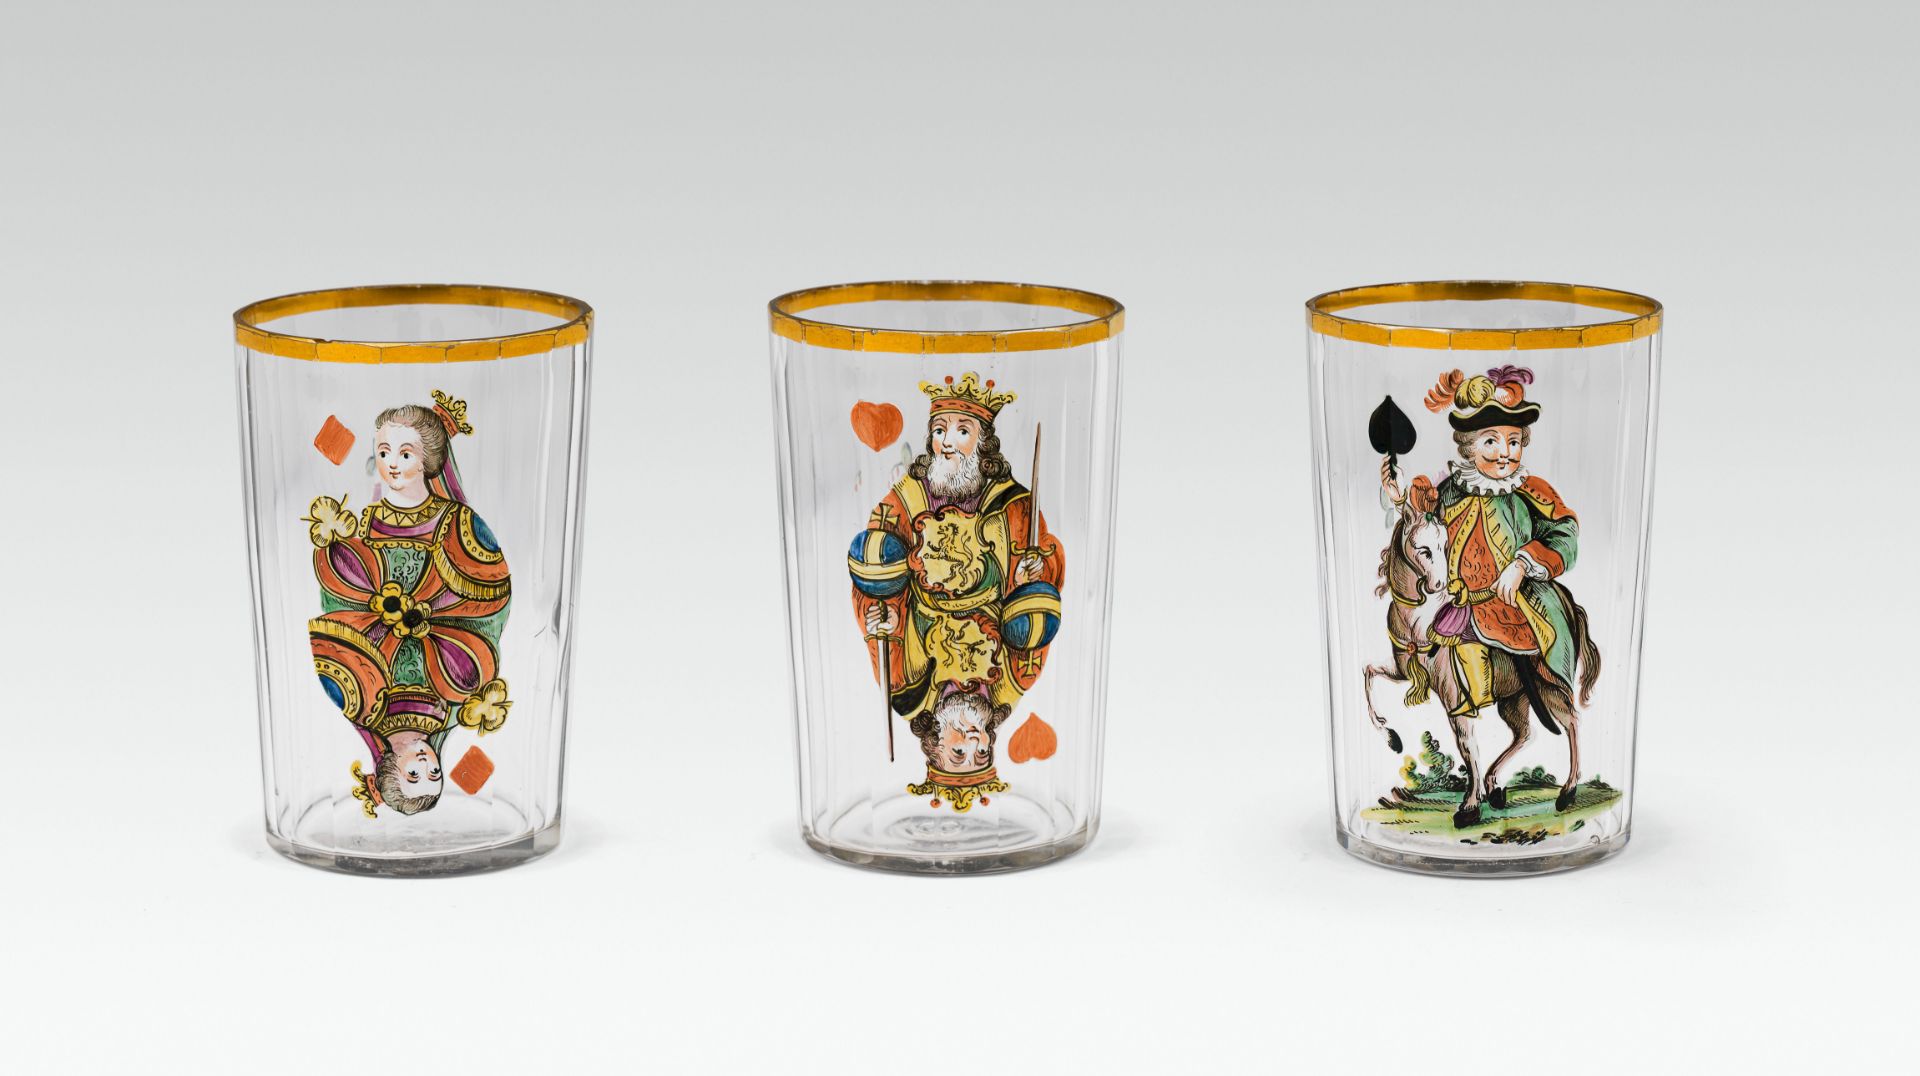 3 Glassescolourless glass, polished; enamel colour; 1 glass with 3 minor chippings at the liph. 11.4 - Image 2 of 4